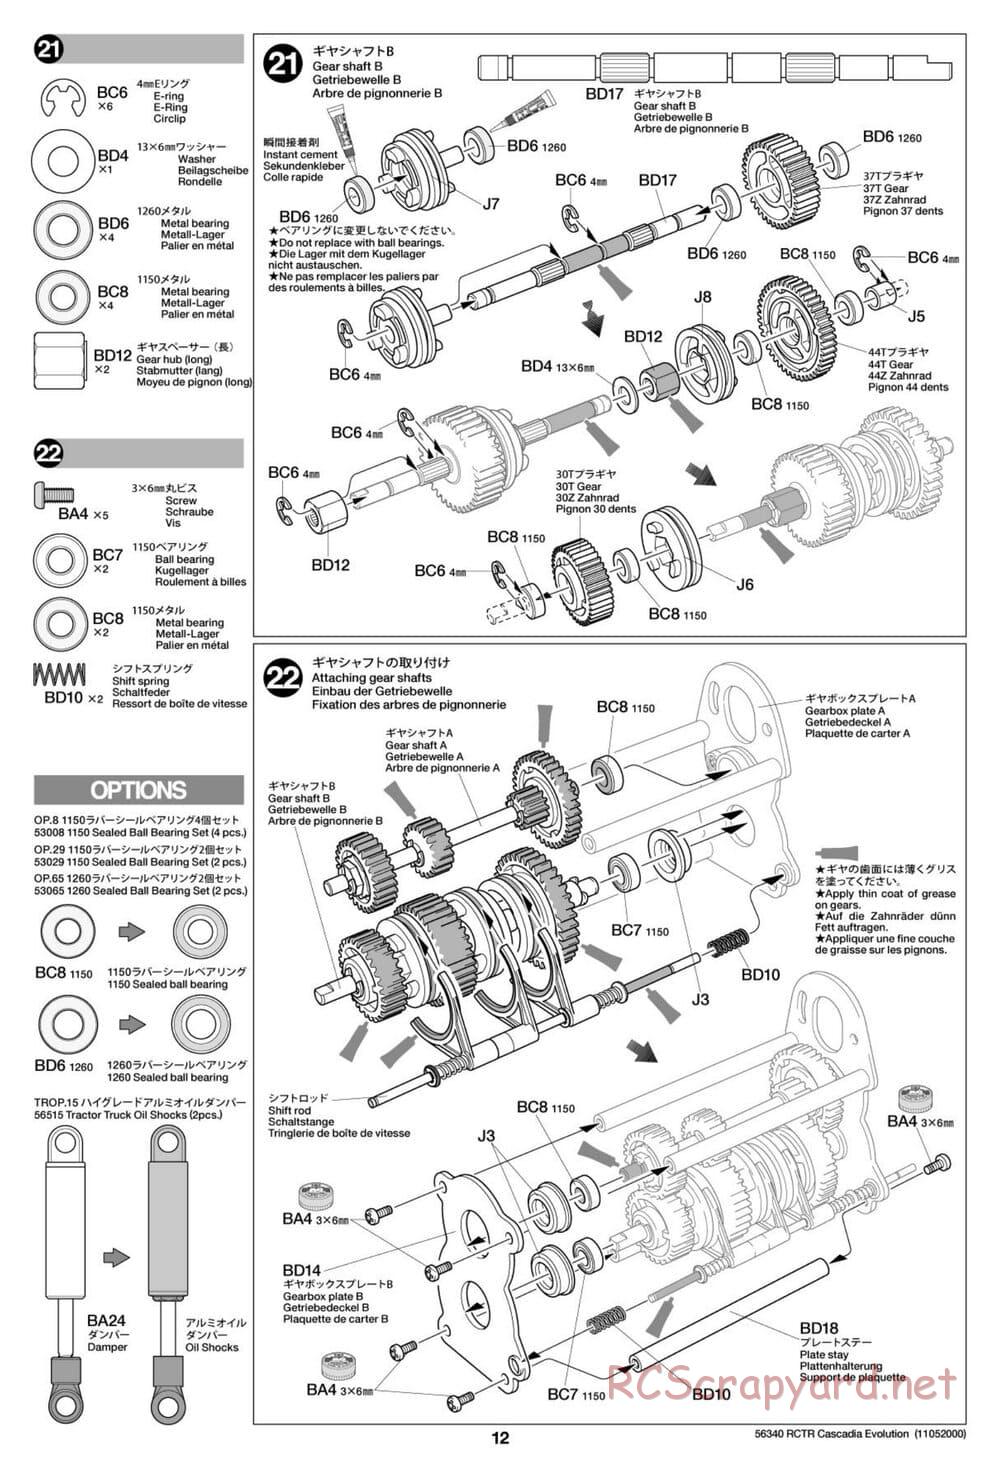 Tamiya - Freightliner Cascadia Evolution Tractor Truck Chassis - Manual - Page 12